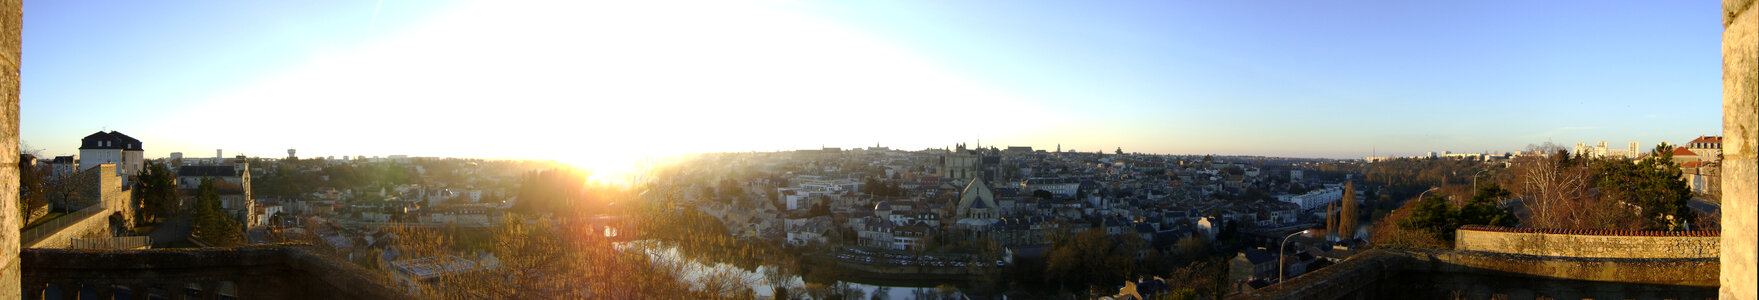 Panoramic view of Poitiers at sunset in France photo